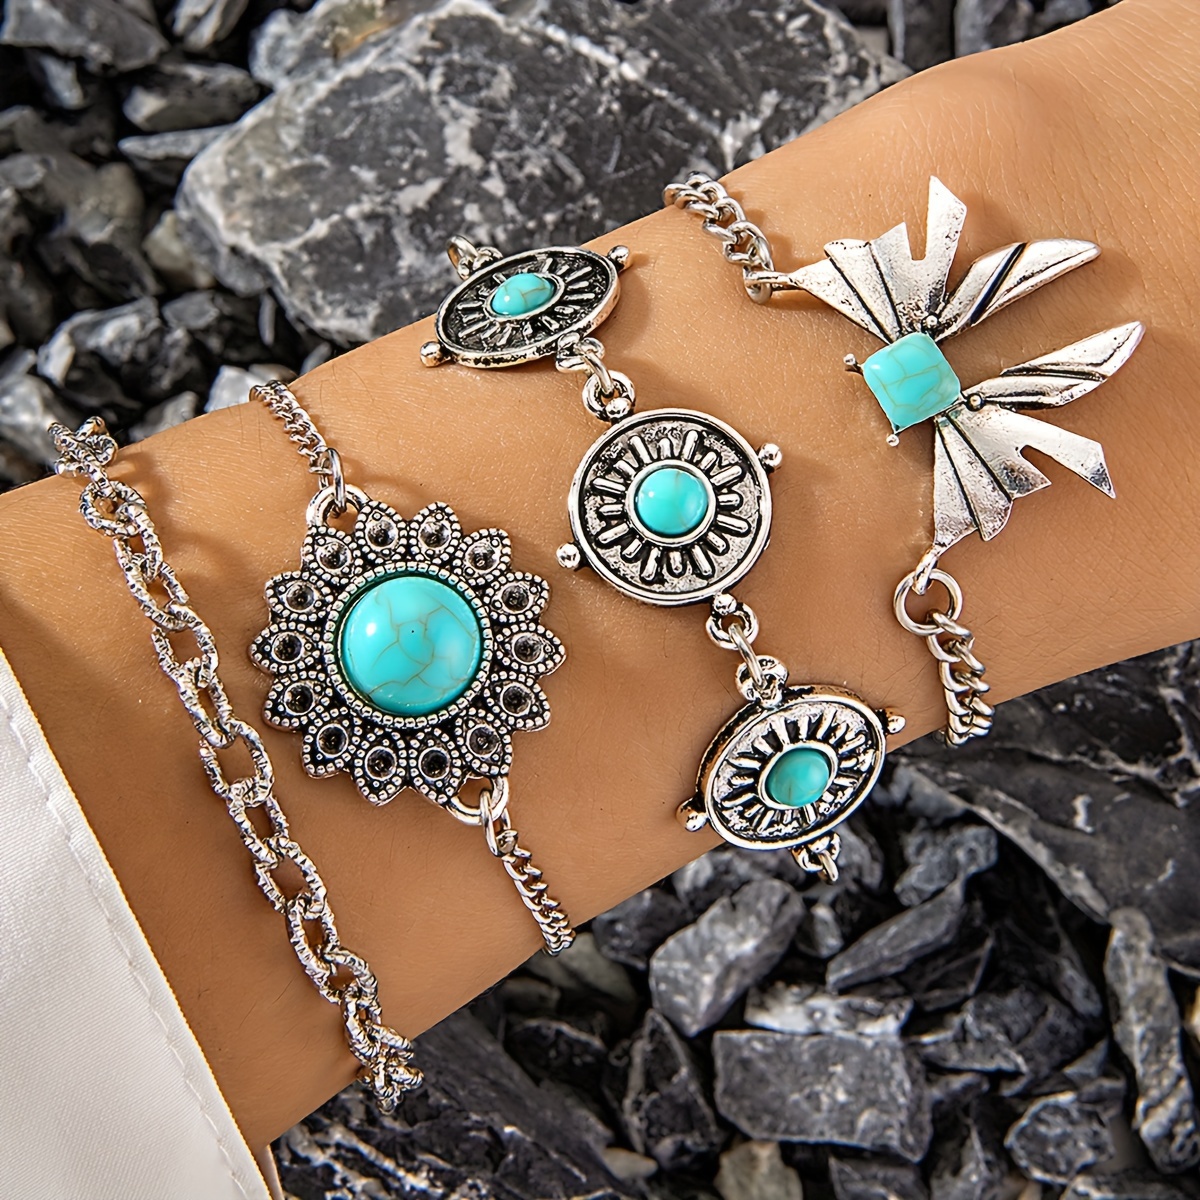 Bohemian Boho Tassel Multilayer Bracelet Hand Jewelry Handmade Turquoise  Stone With Tree Of Life Pendant Gifts For Women